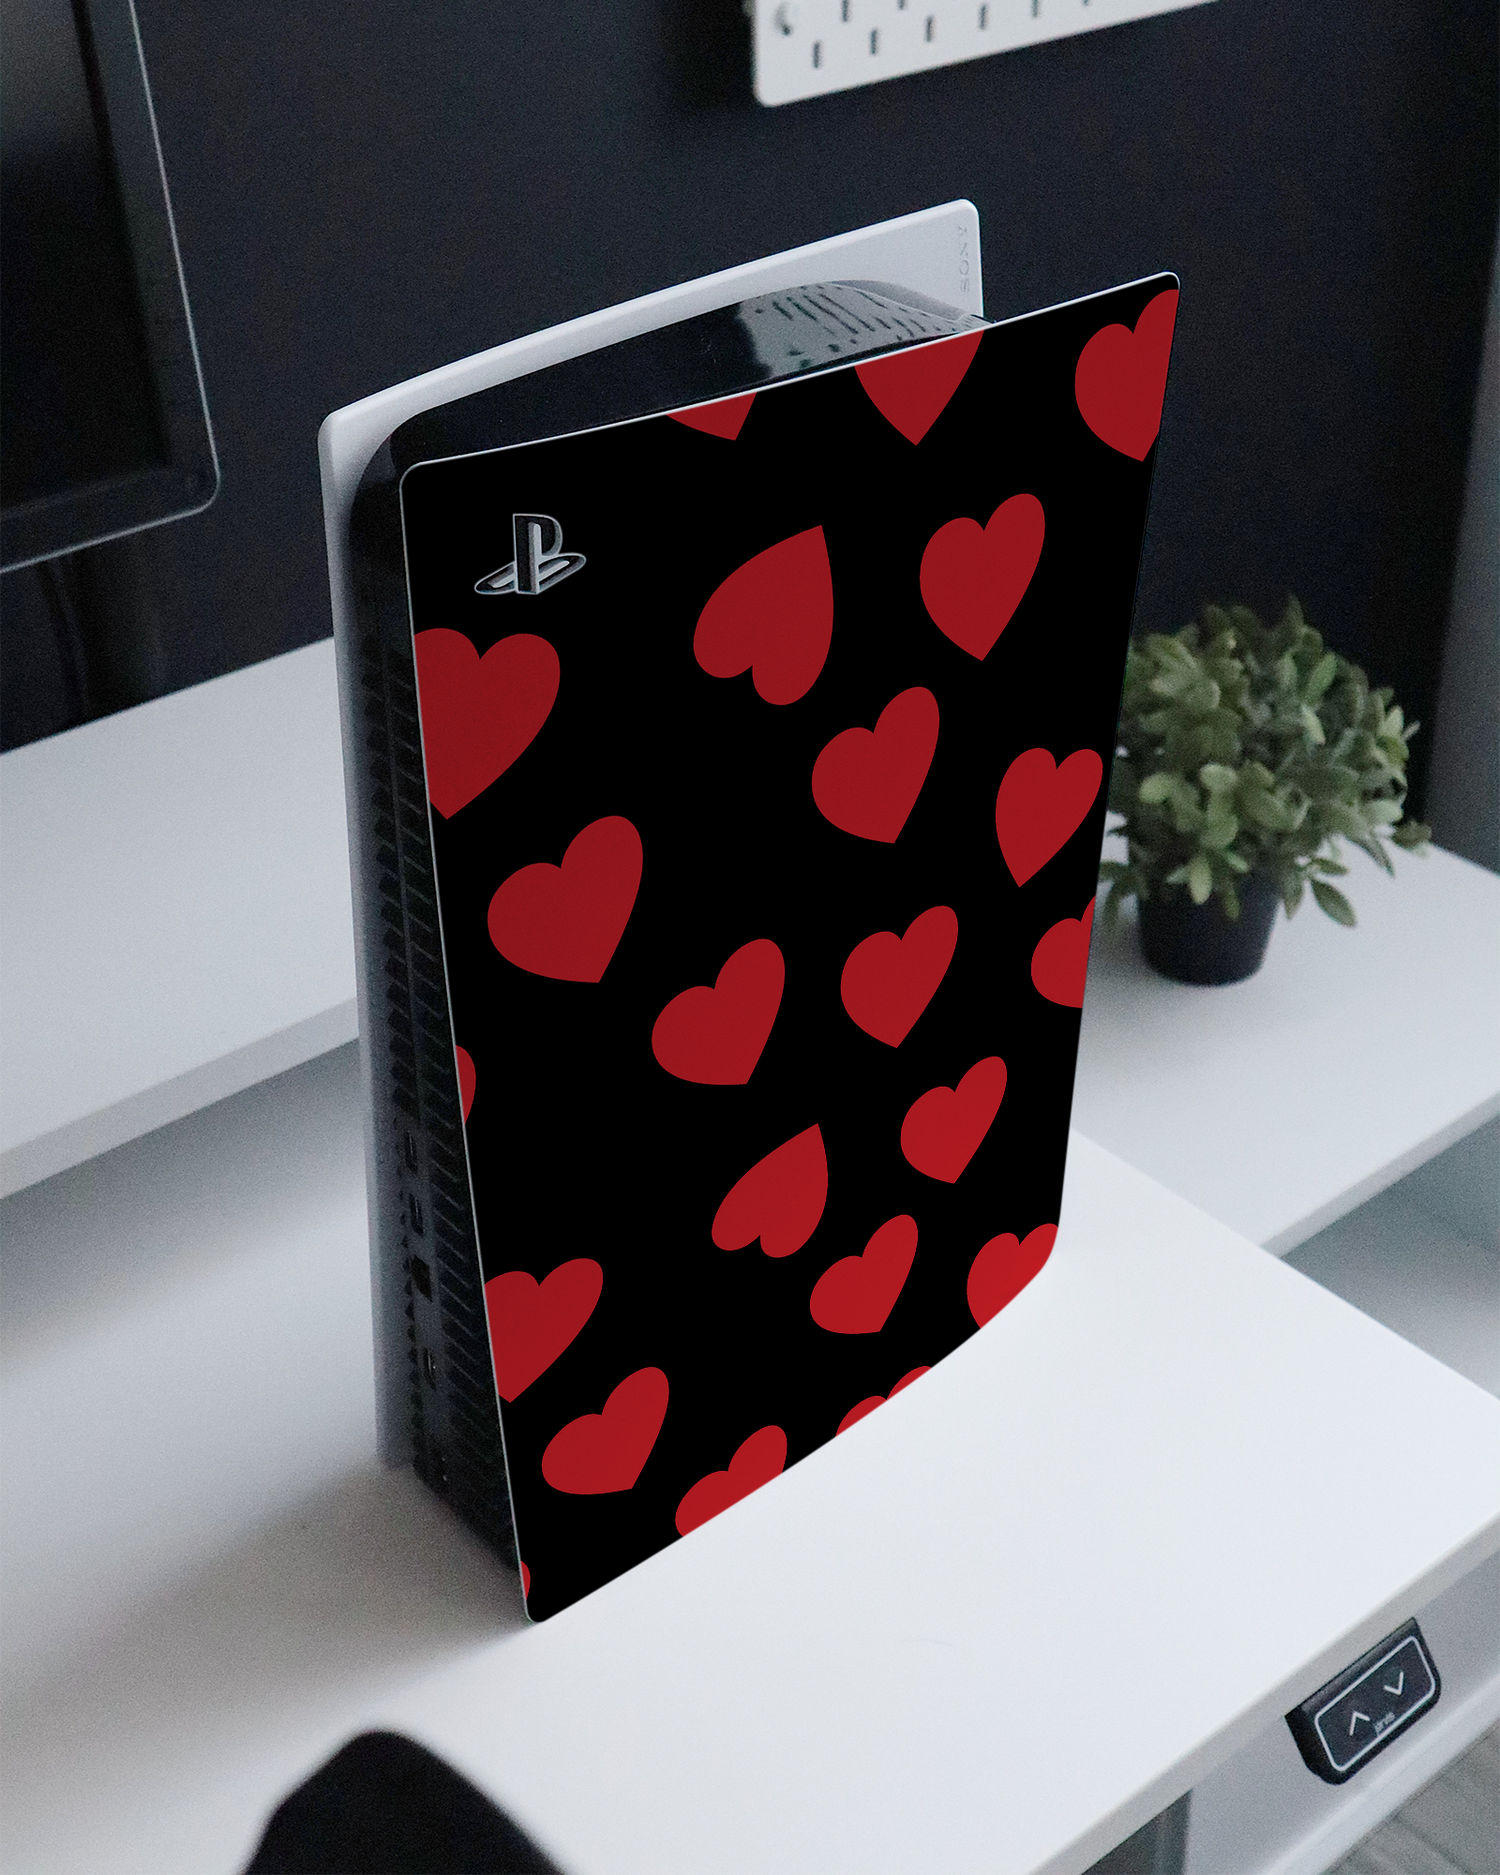 Repeating Hearts Console Skin for Sony PlayStation 5 Digital Edition standing on a sideboard 